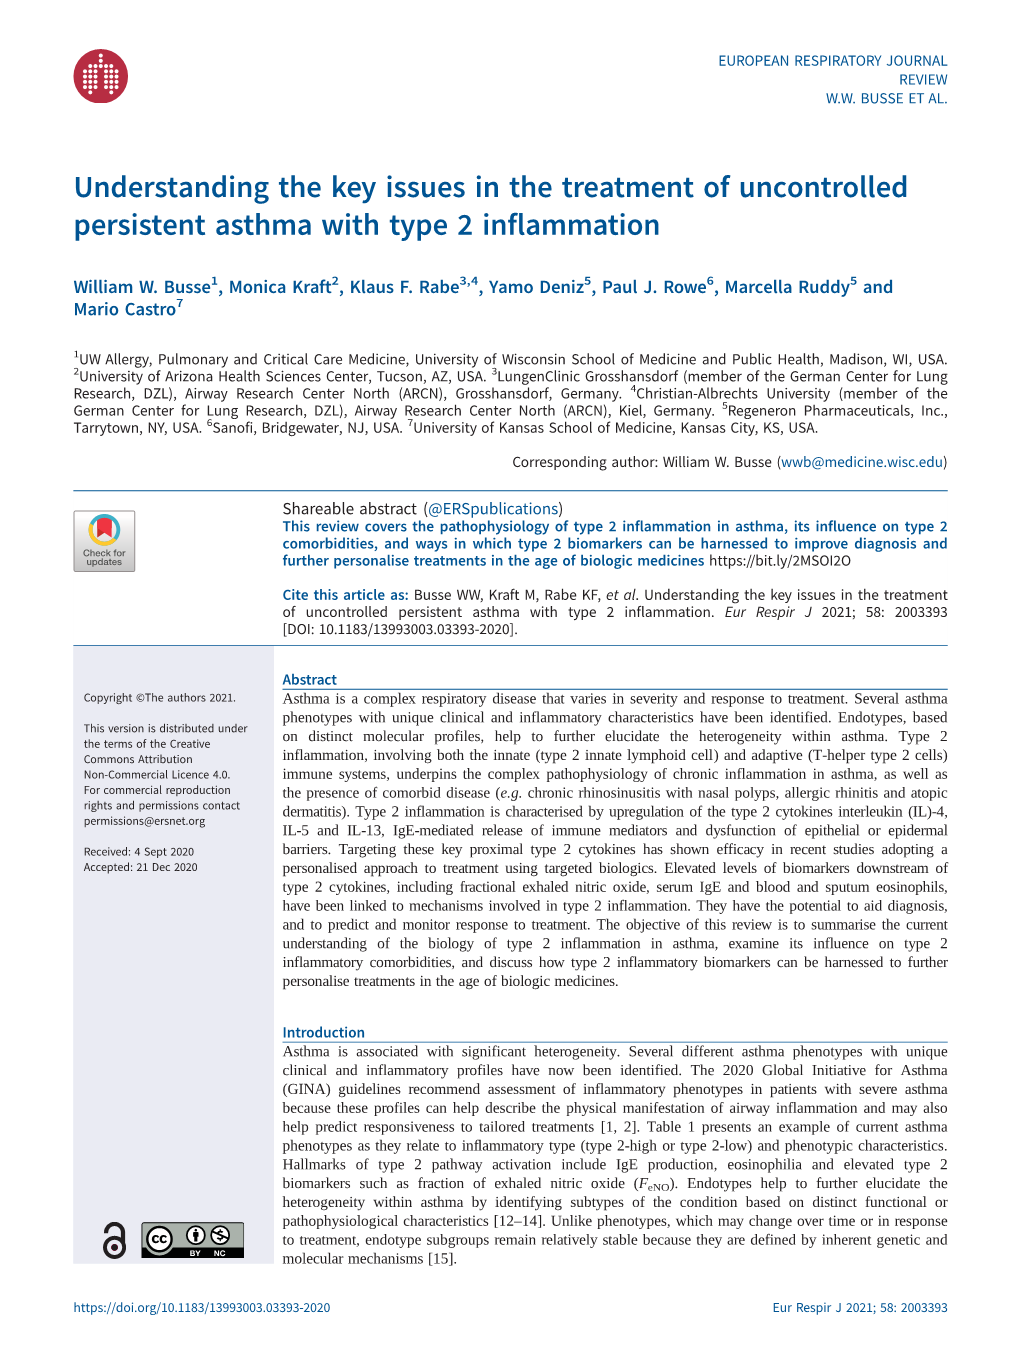 Understanding the Key Issues in the Treatment of Uncontrolled Persistent Asthma with Type 2 Inflammation